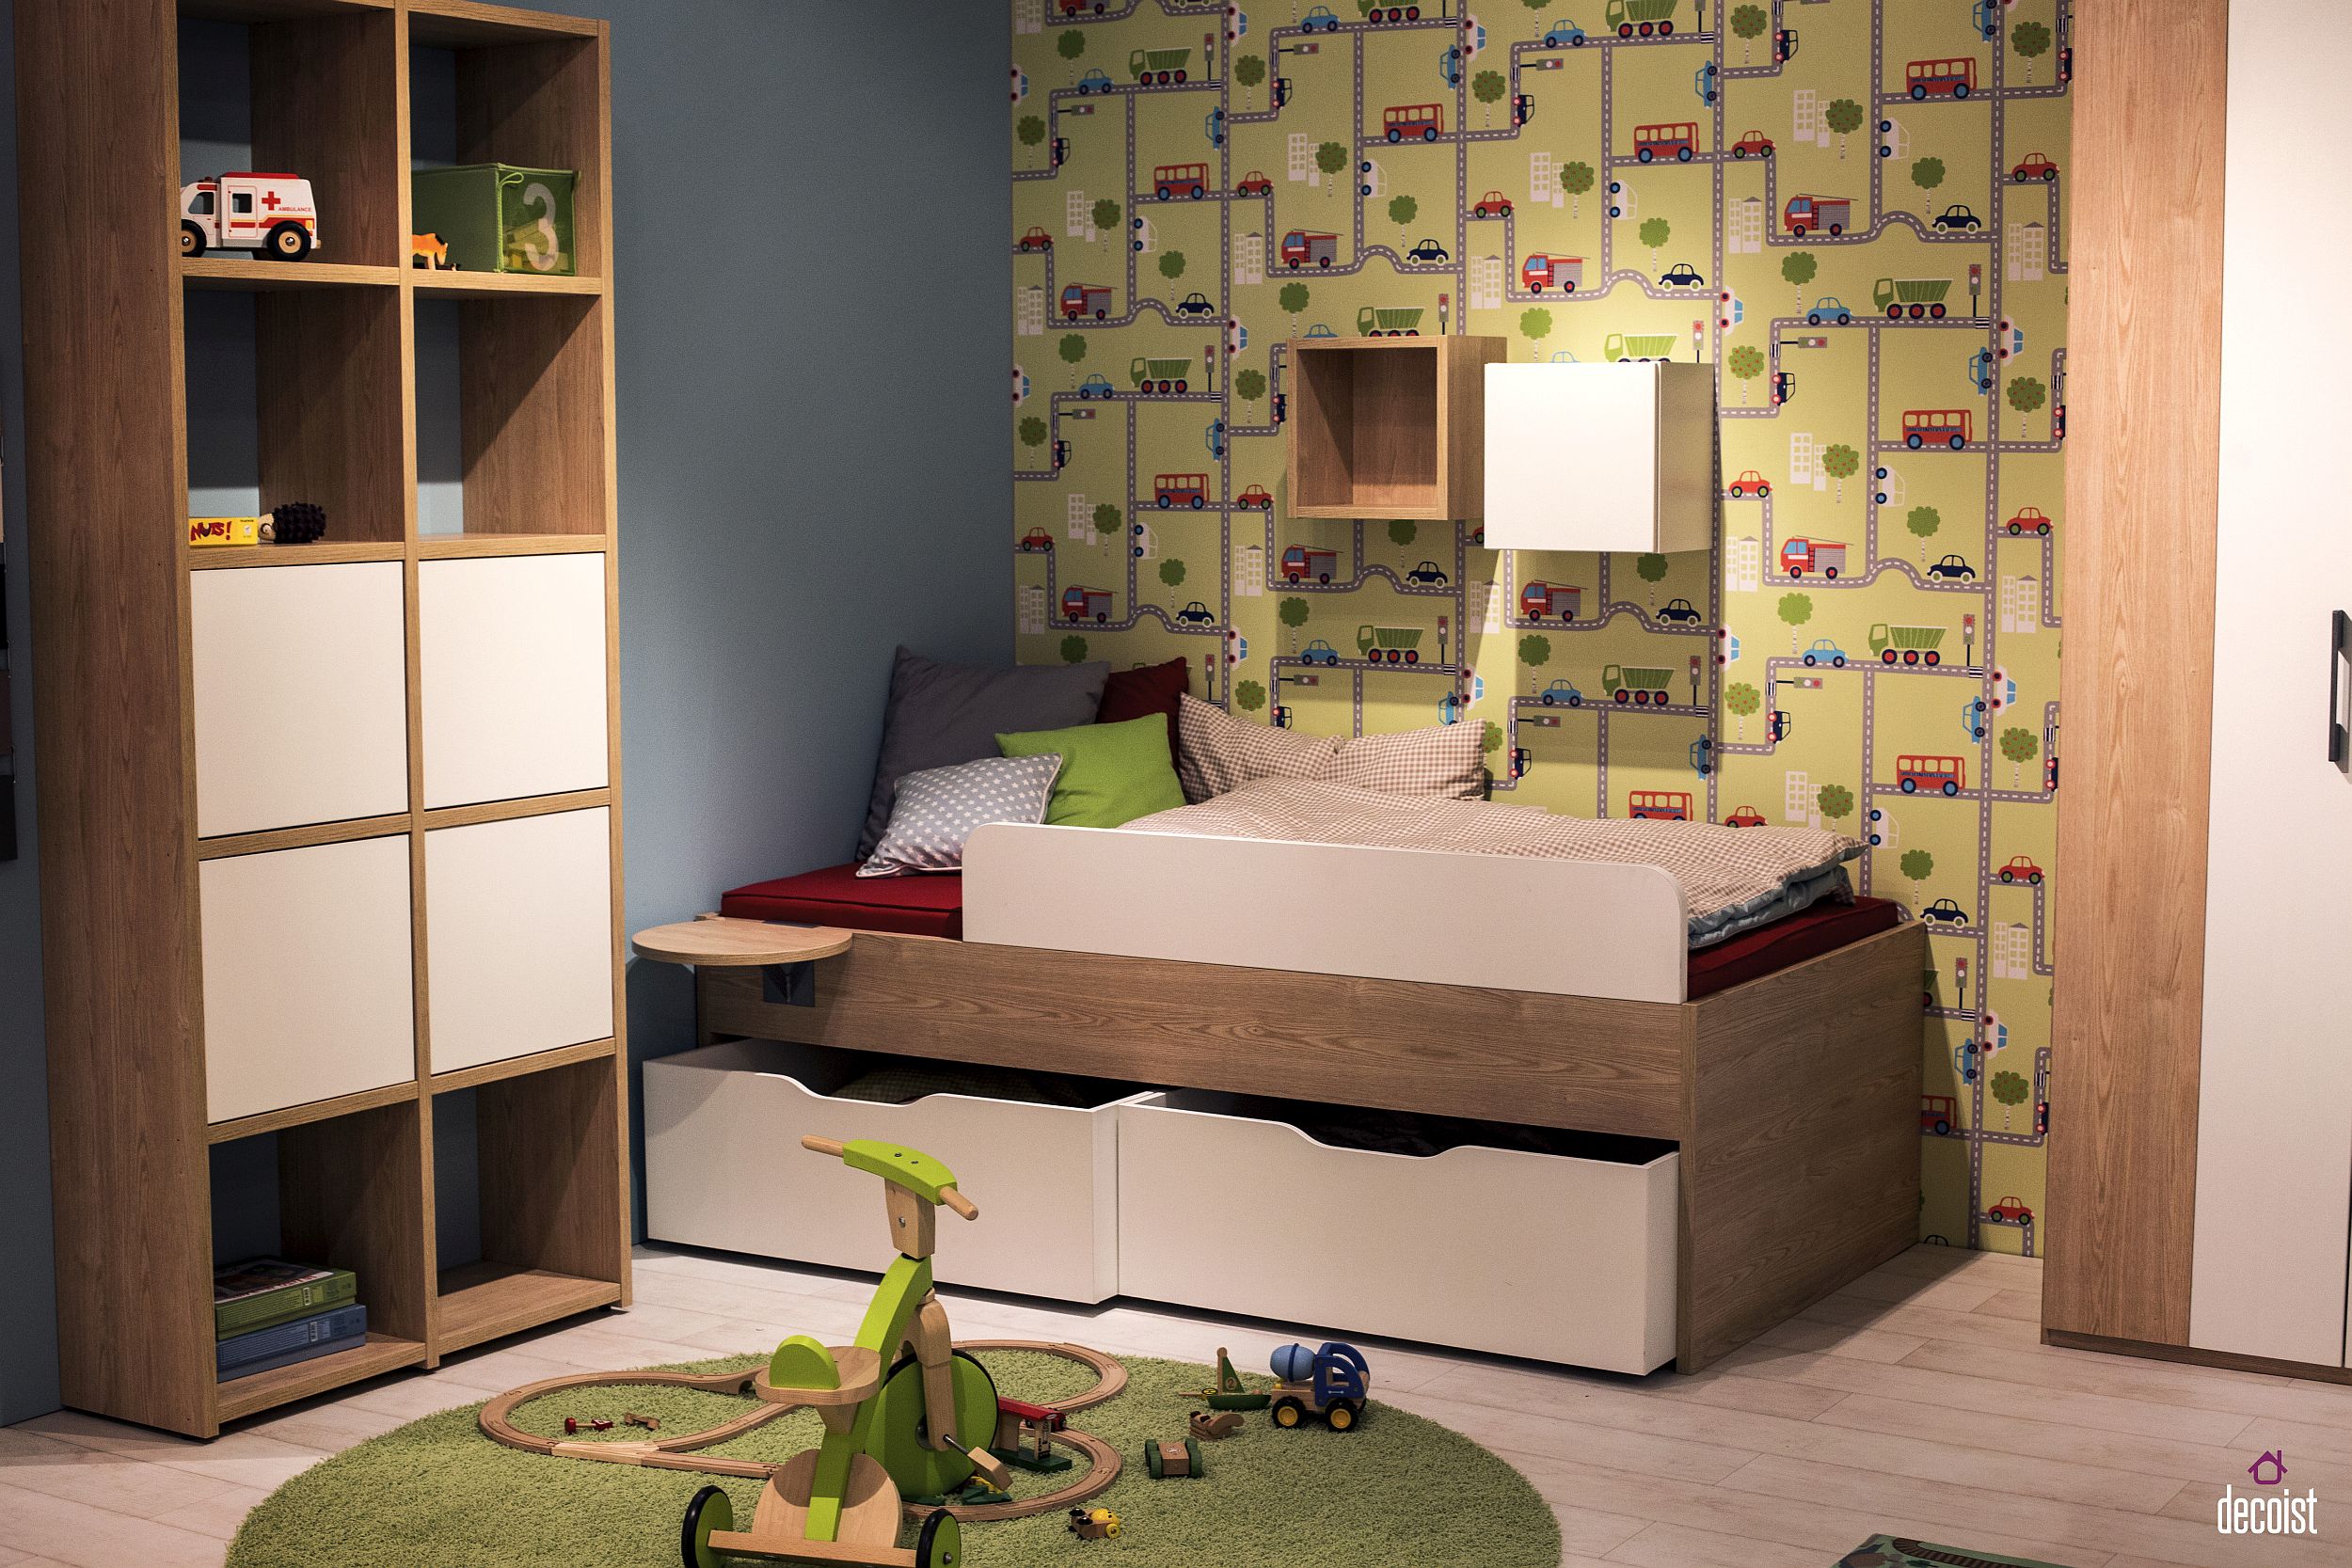 Small kids'bedroom decorating idea with trundle bed in corner and tall, open shelves